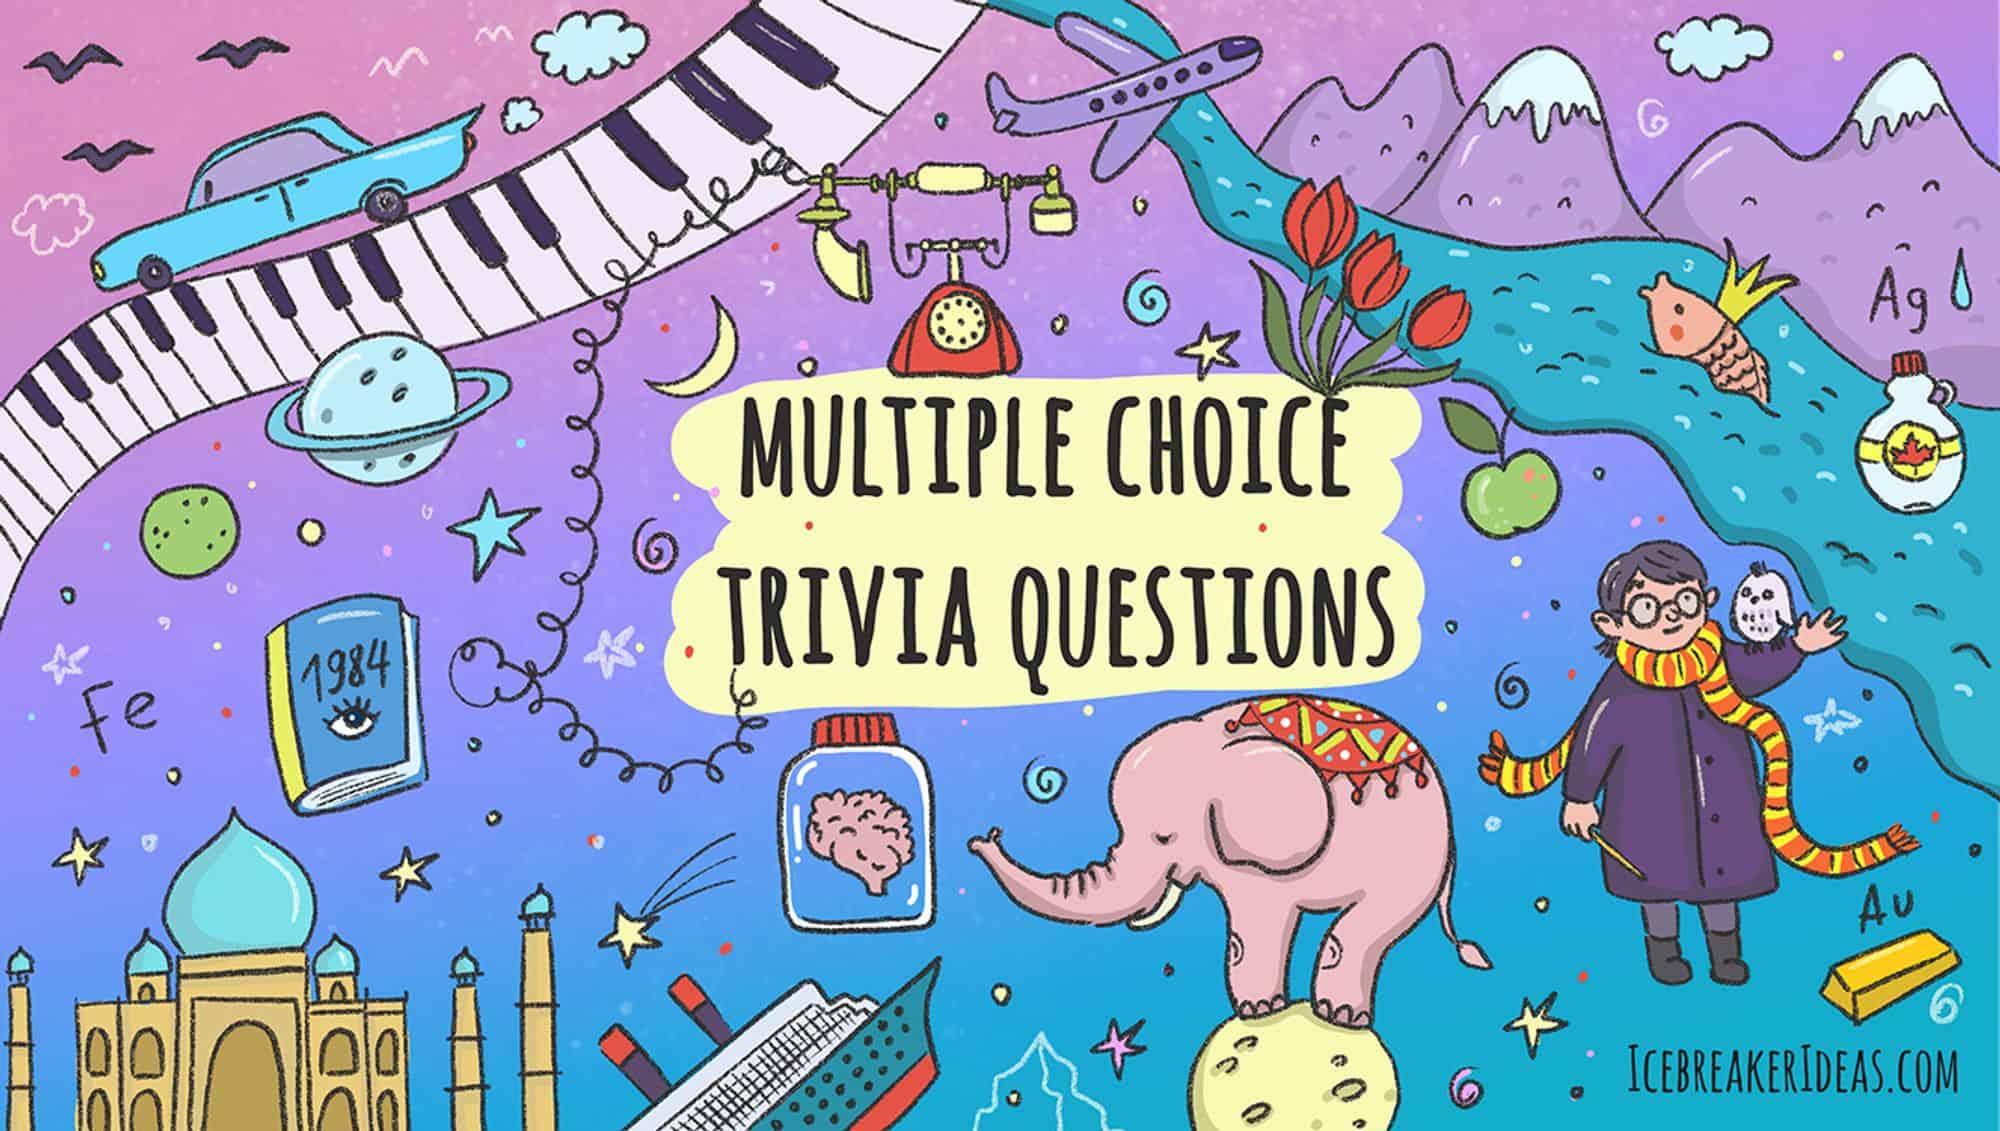 Multiple Choice Trivia Questions